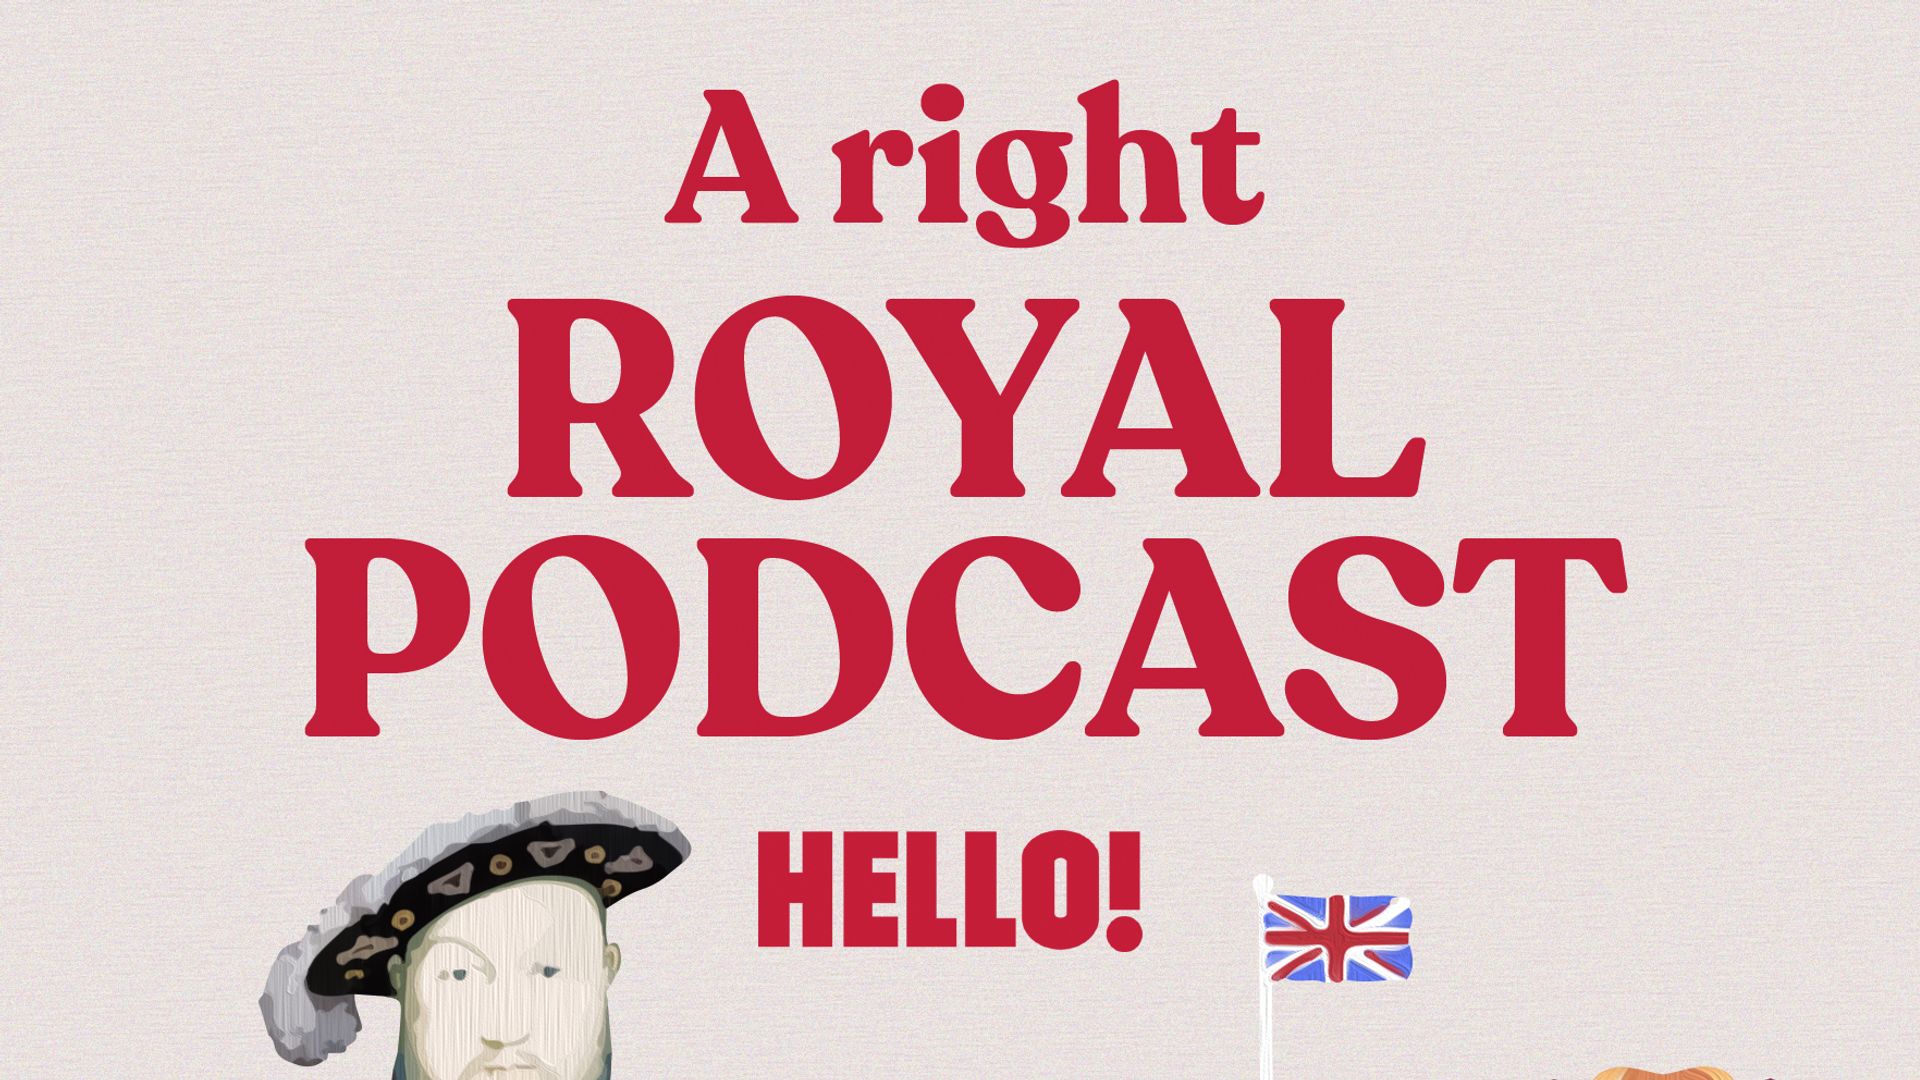 A Right Royal Podcast ghost special